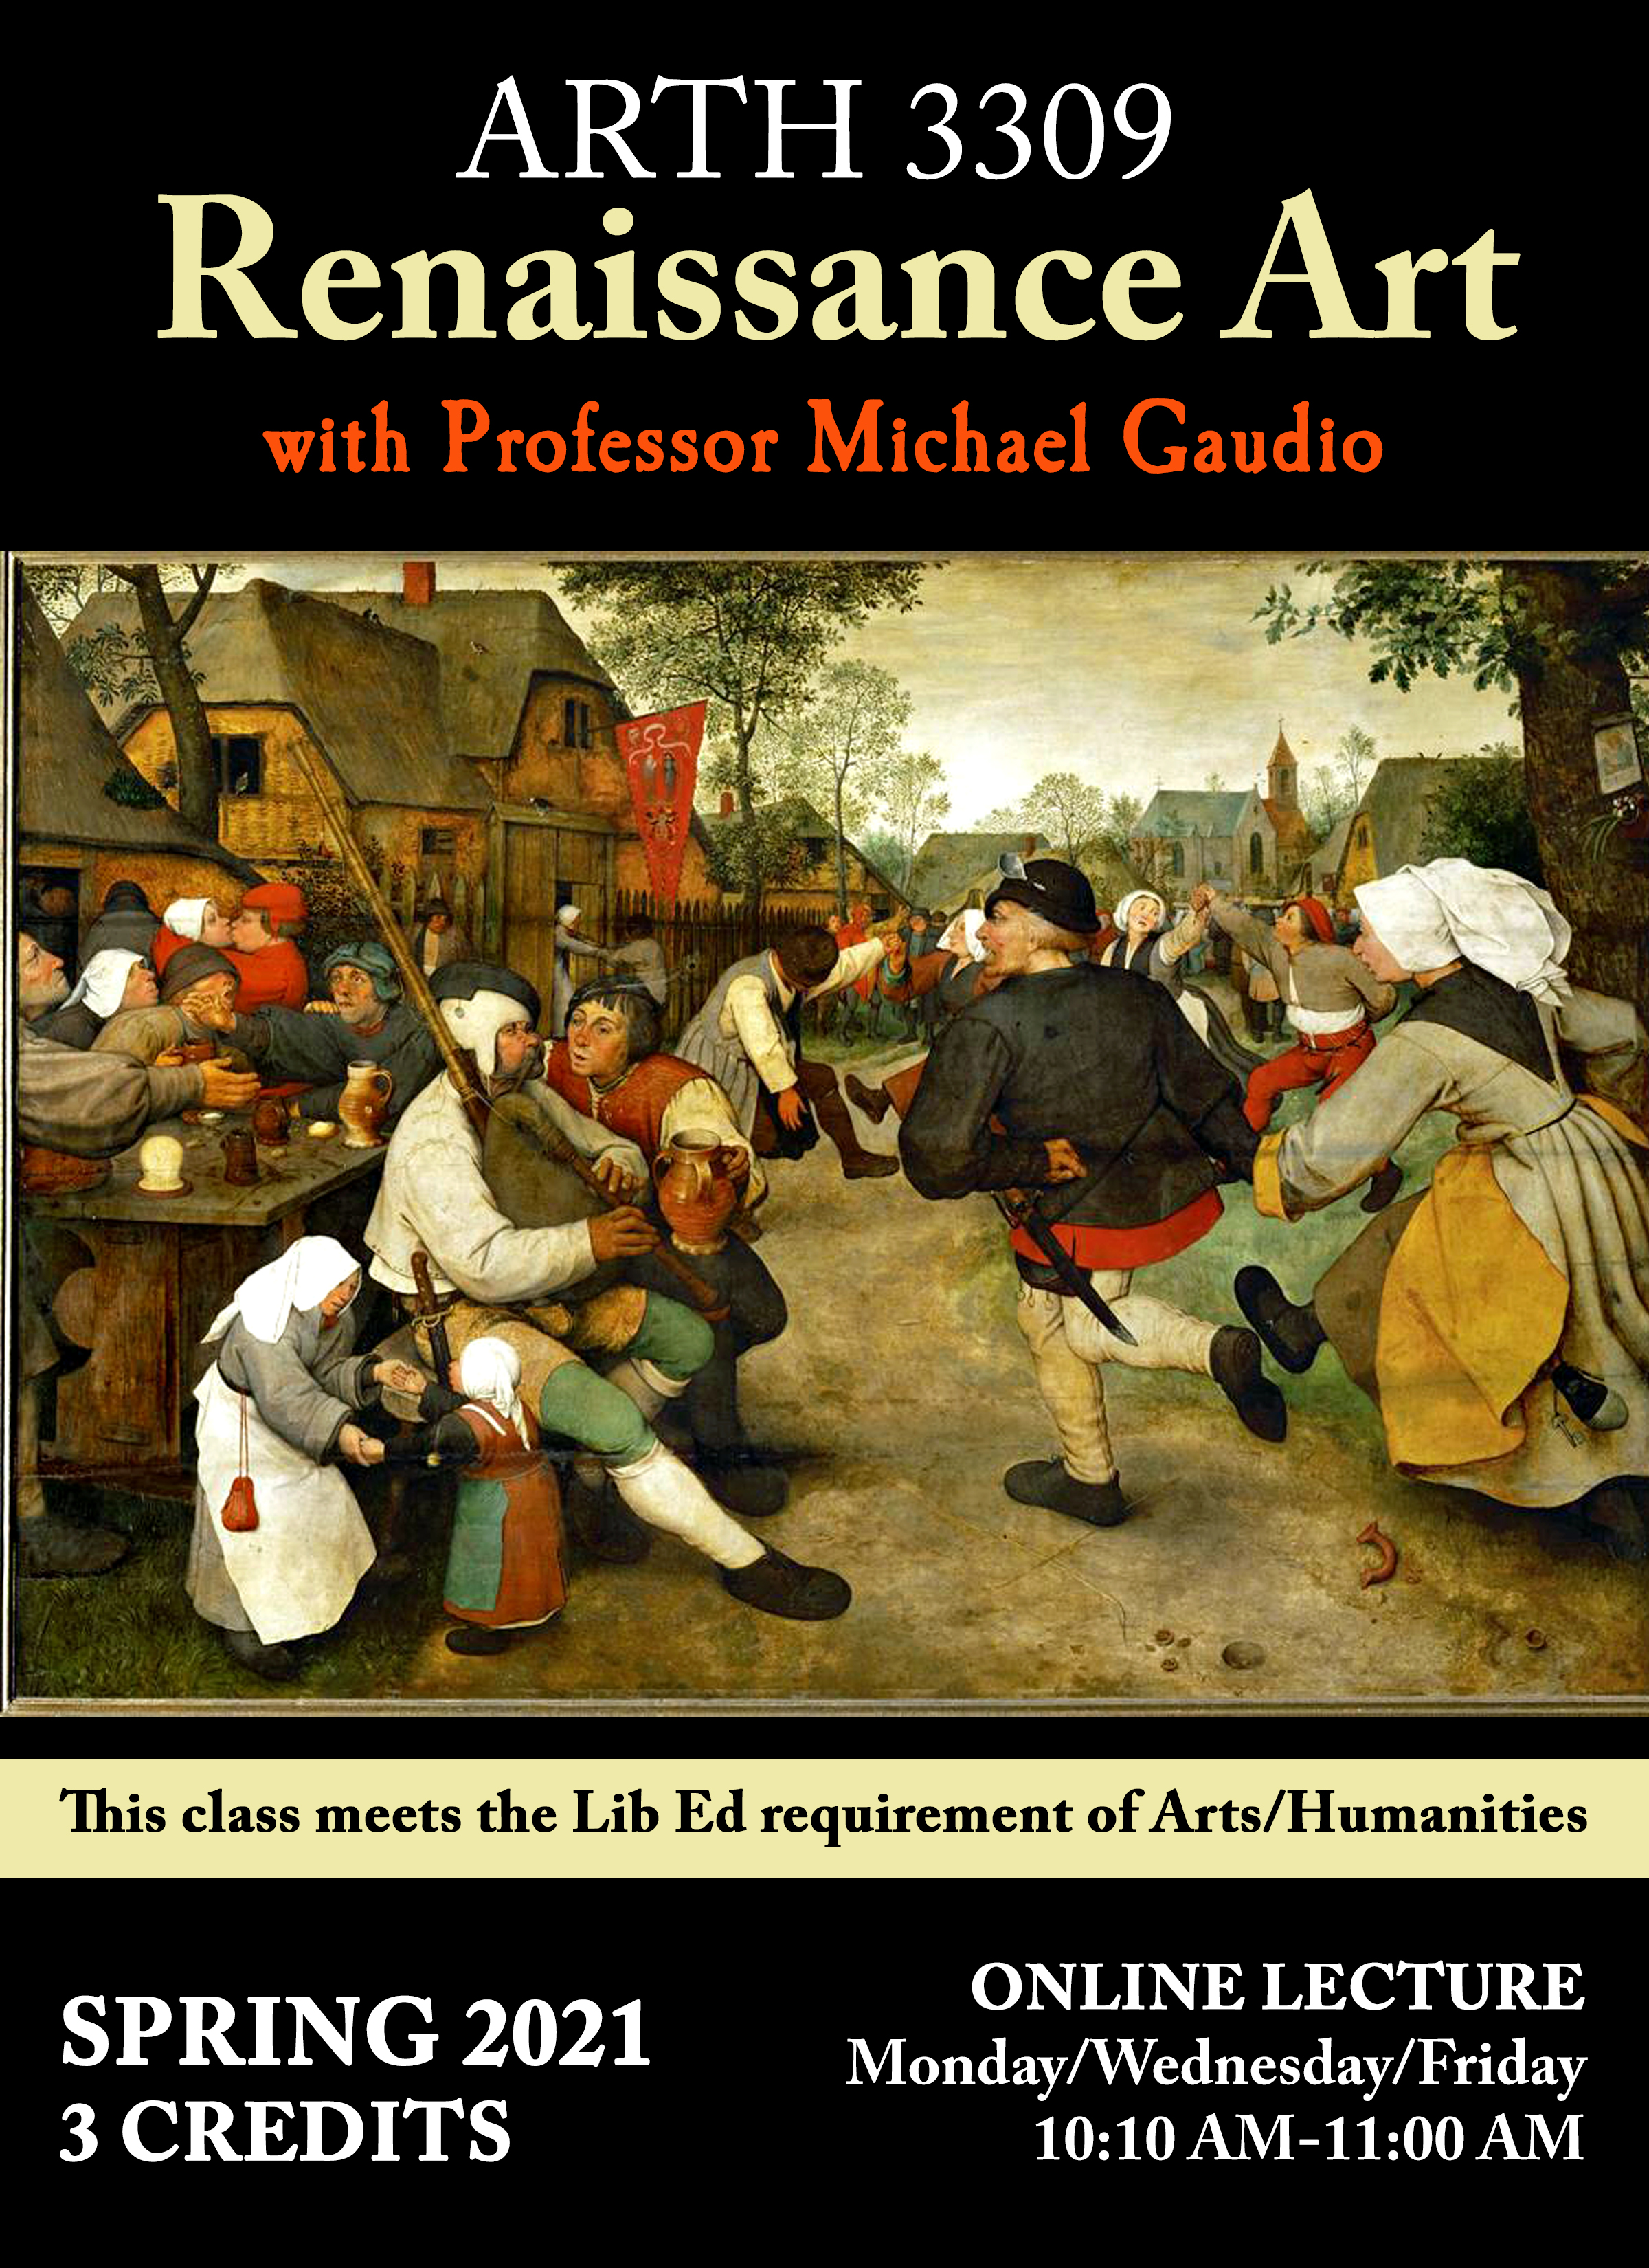 Course poster for ARTH 3309 Renaissance Art with Professor Michael Gaudio. Image of The Peasant Dance by Pieter Bruegel the Elder. Online lecture Mon/Wed/Friday 10:10-11:00am